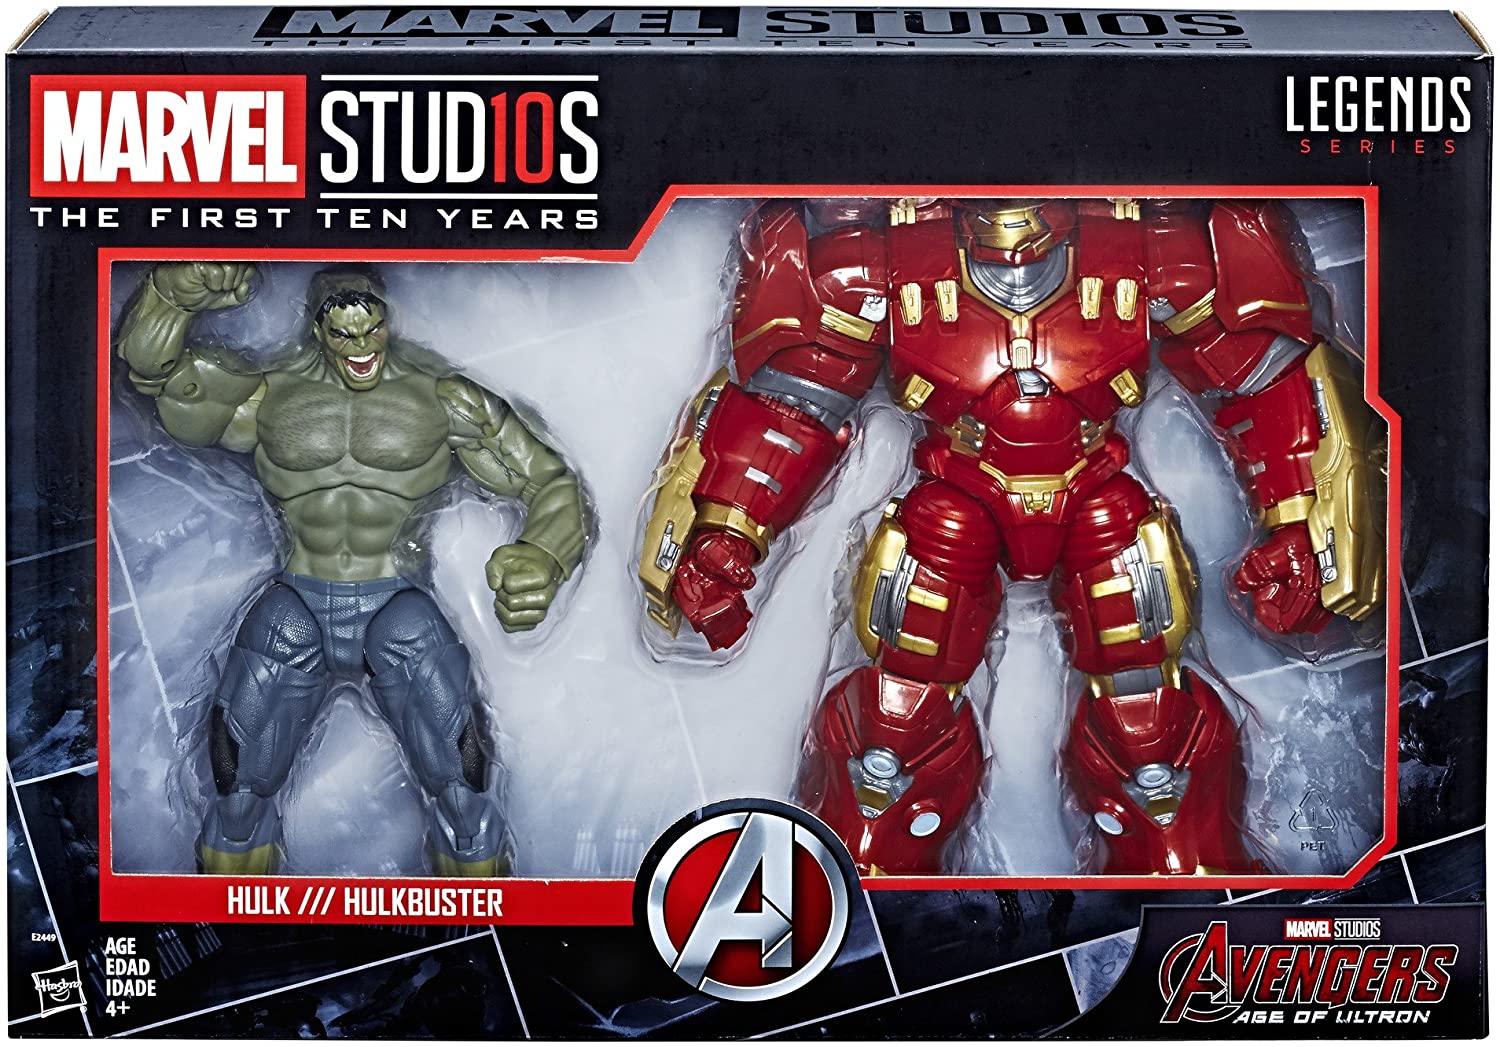 marvel legends first ten years hulk and hulkbuster